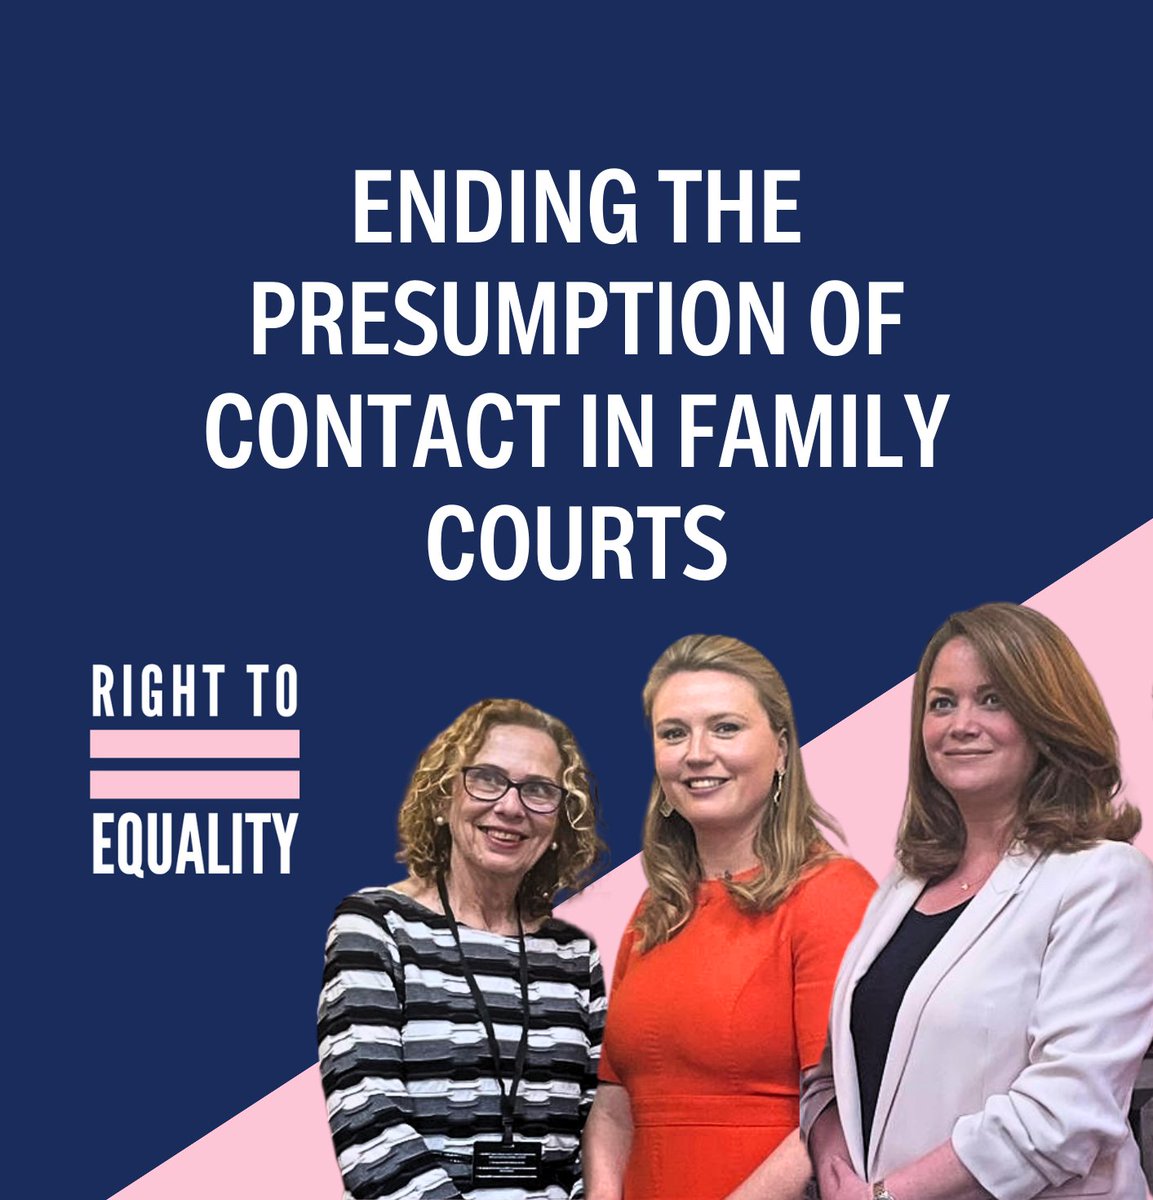 It was great to attend the launch of @Right2Equality report on 'Ending the Presumption of Contact in the Family Courts' yesterday! A massive well done to @BarnettAdrienne and @DrProudman for working tirelessly to make the courts a safer place 👏 🔗: bit.ly/4bCQZ8d